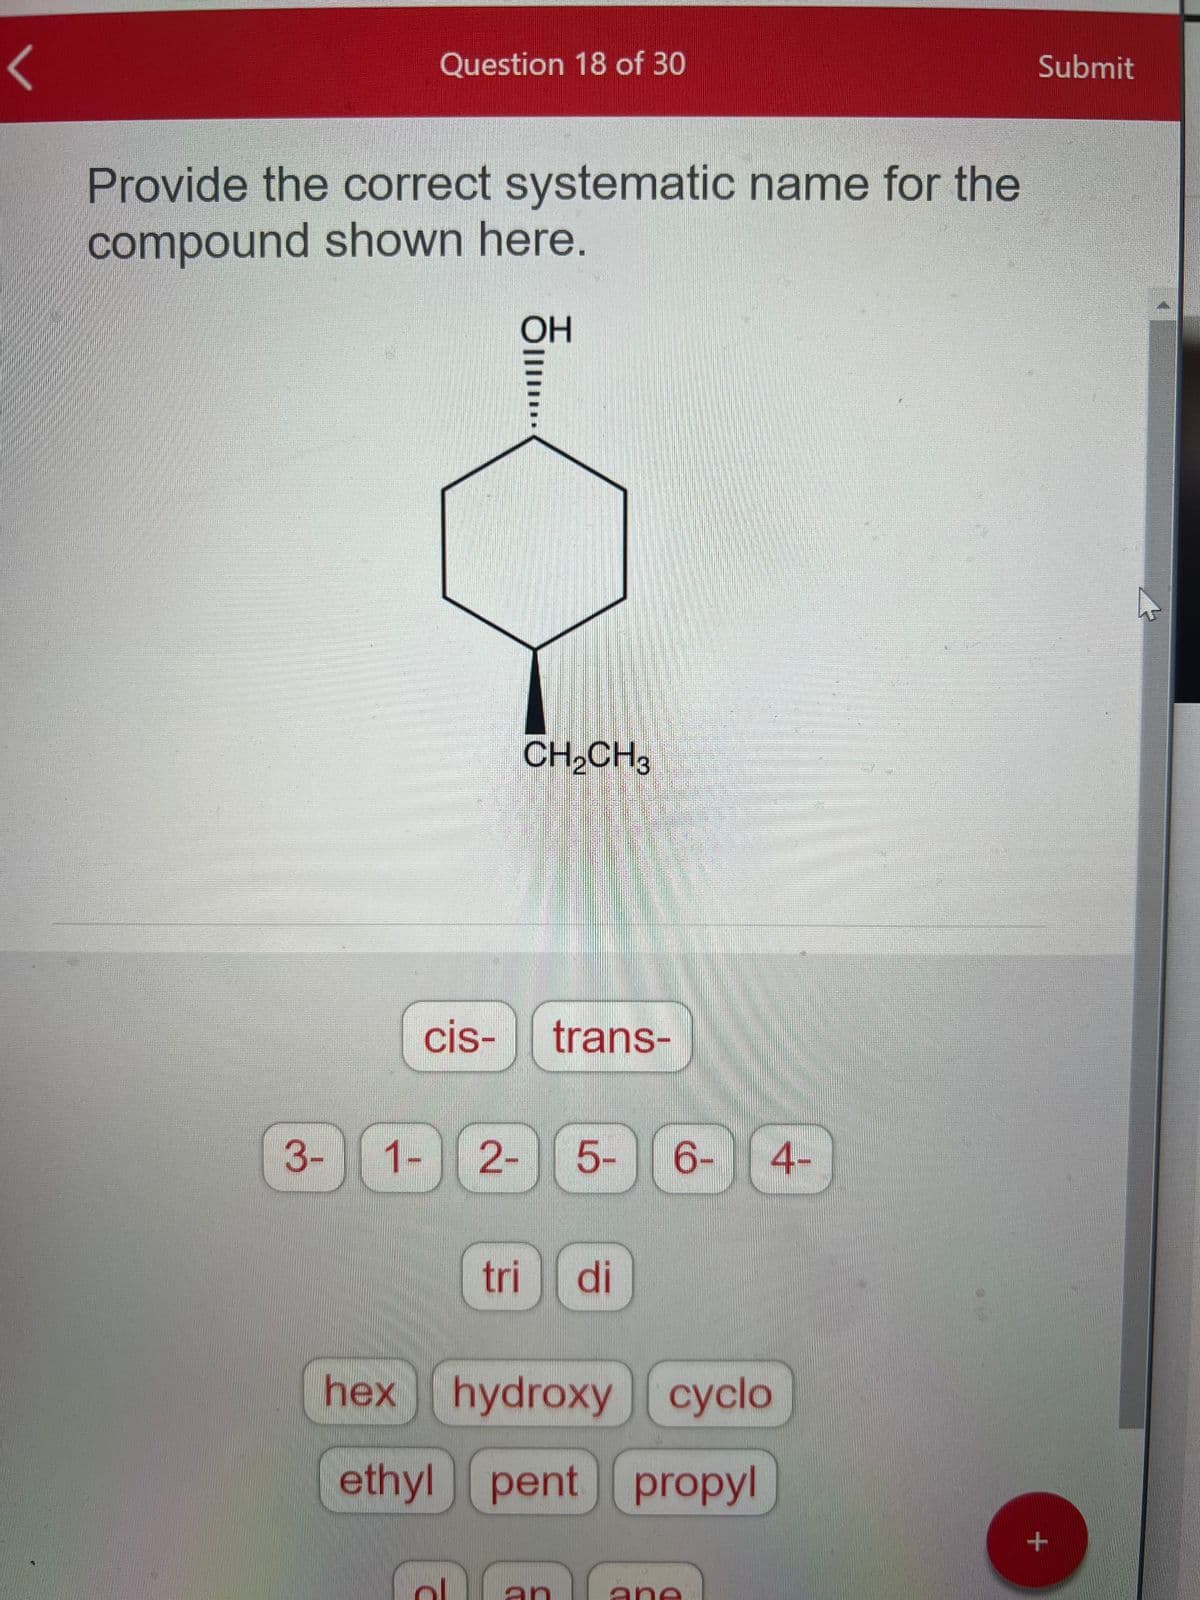 <
Question 18 of 30
Provide the correct systematic name for the
compound shown here.
3-
cis-
OH
CH₂CH3
ol
1- 2- 5- 6-
trans-
tri di
hex hydroxy cyclo
ethyl pent propyl
an
4-
ane
Submit
+